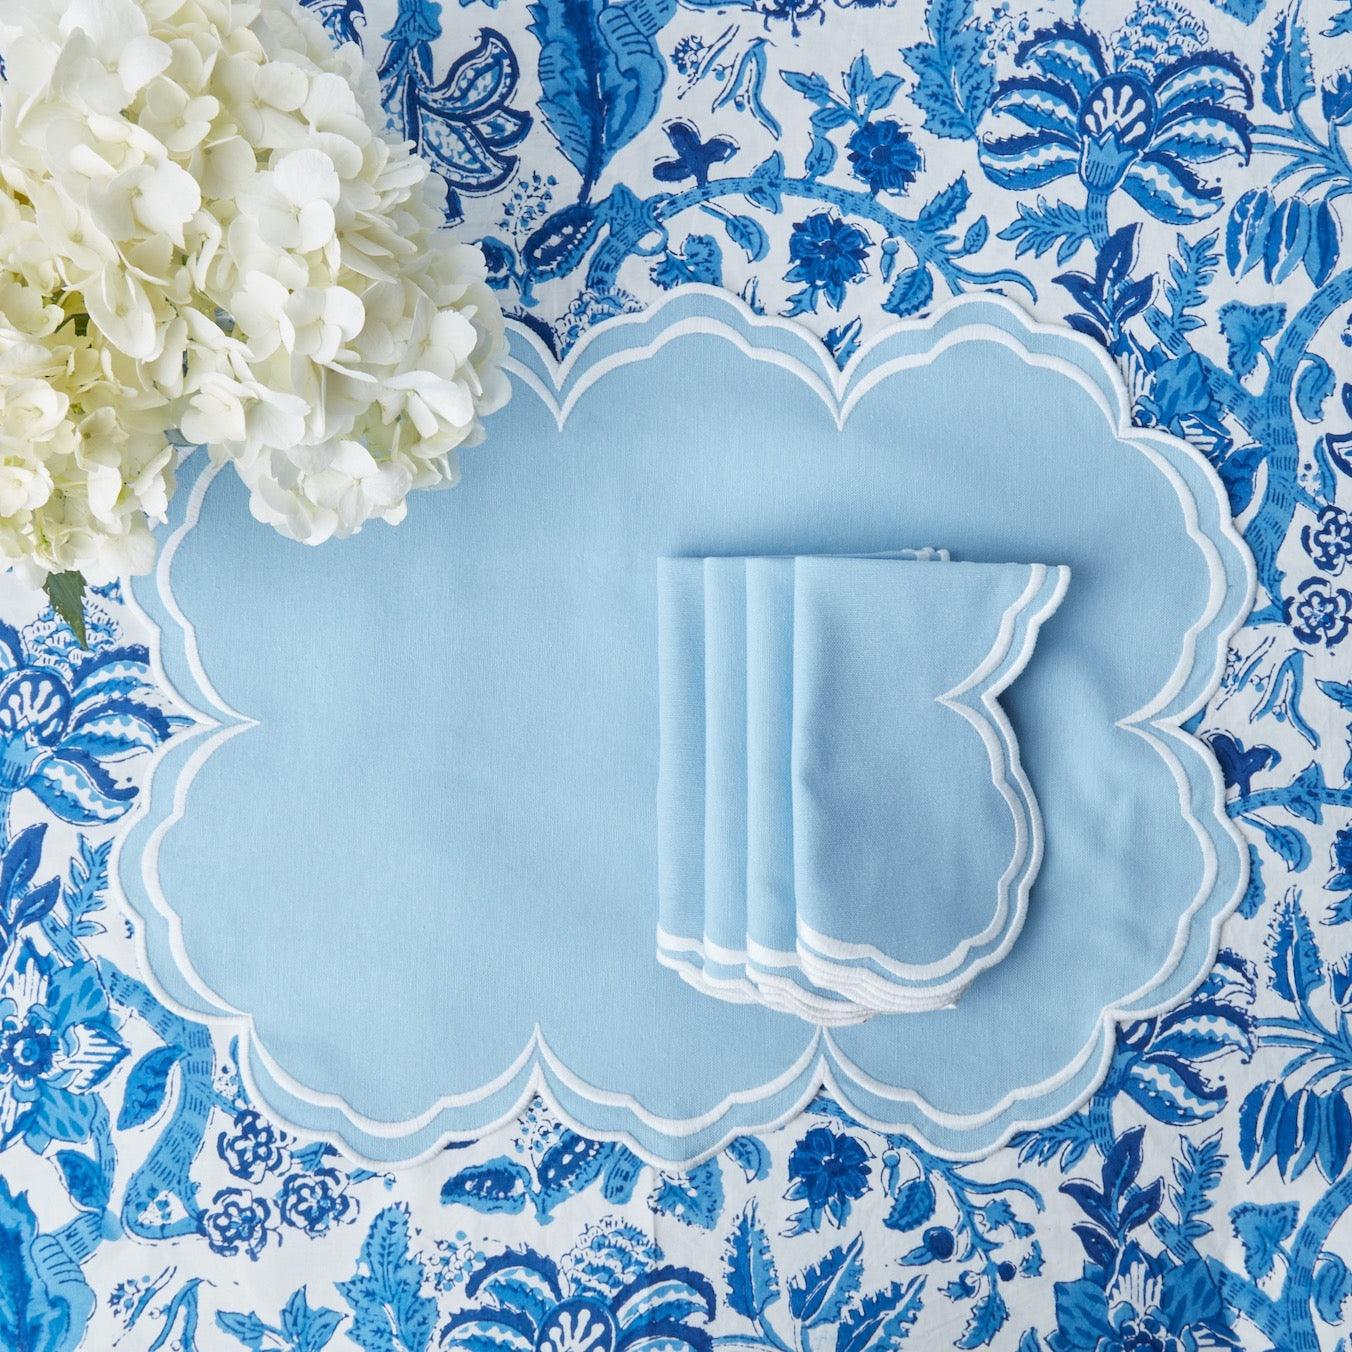 Cloth Napkins Set of 4 in Blue and White Floral Chinoiserie Print – Kate  McEnroe New York